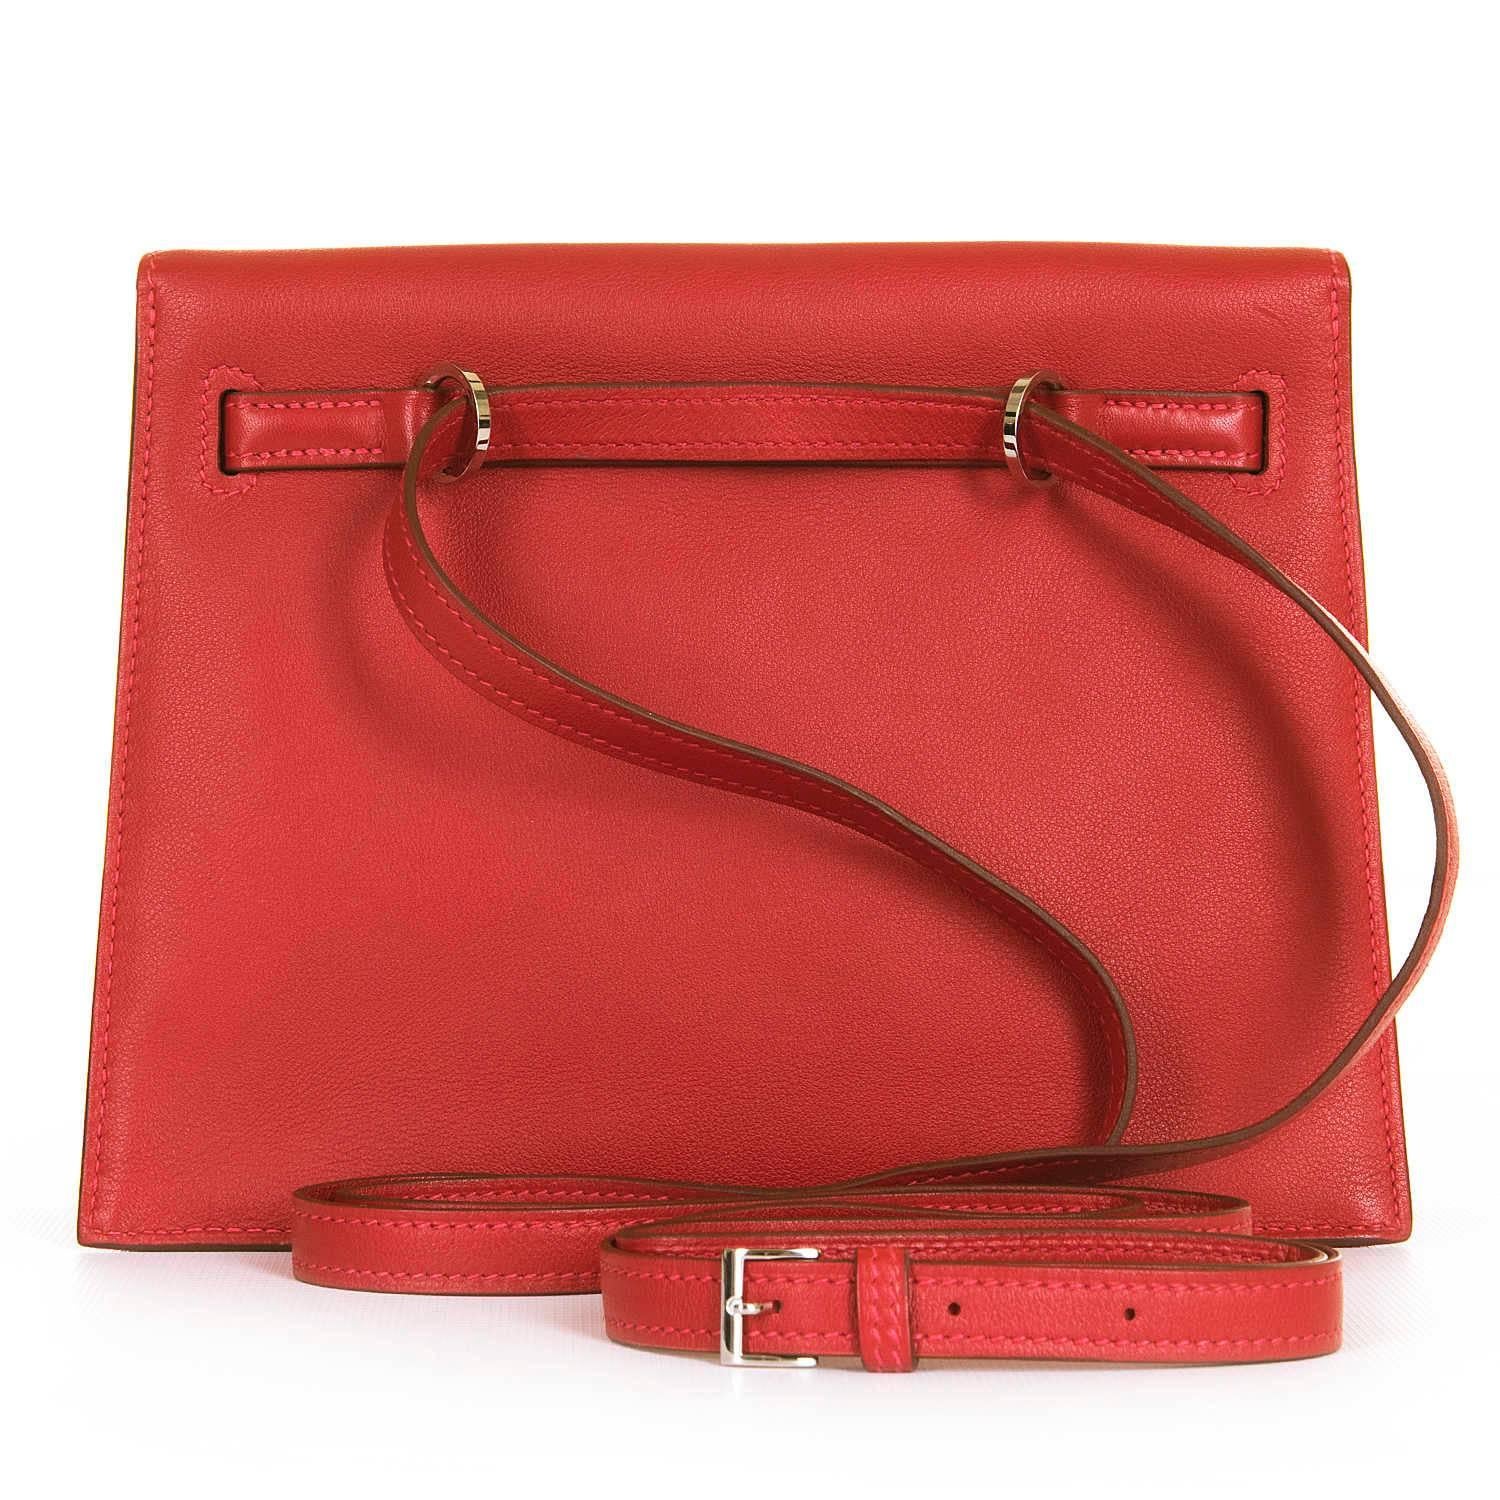 A Fabulous Hermes Kelly 'Danse' in Stunning Imperial Red Swift Leather with Silver Palladium Hardware. This Very special Kelly Bag is no Longer available at Hermes. In pristine condition, still with the plastics on the clasp, the bag can be worn as